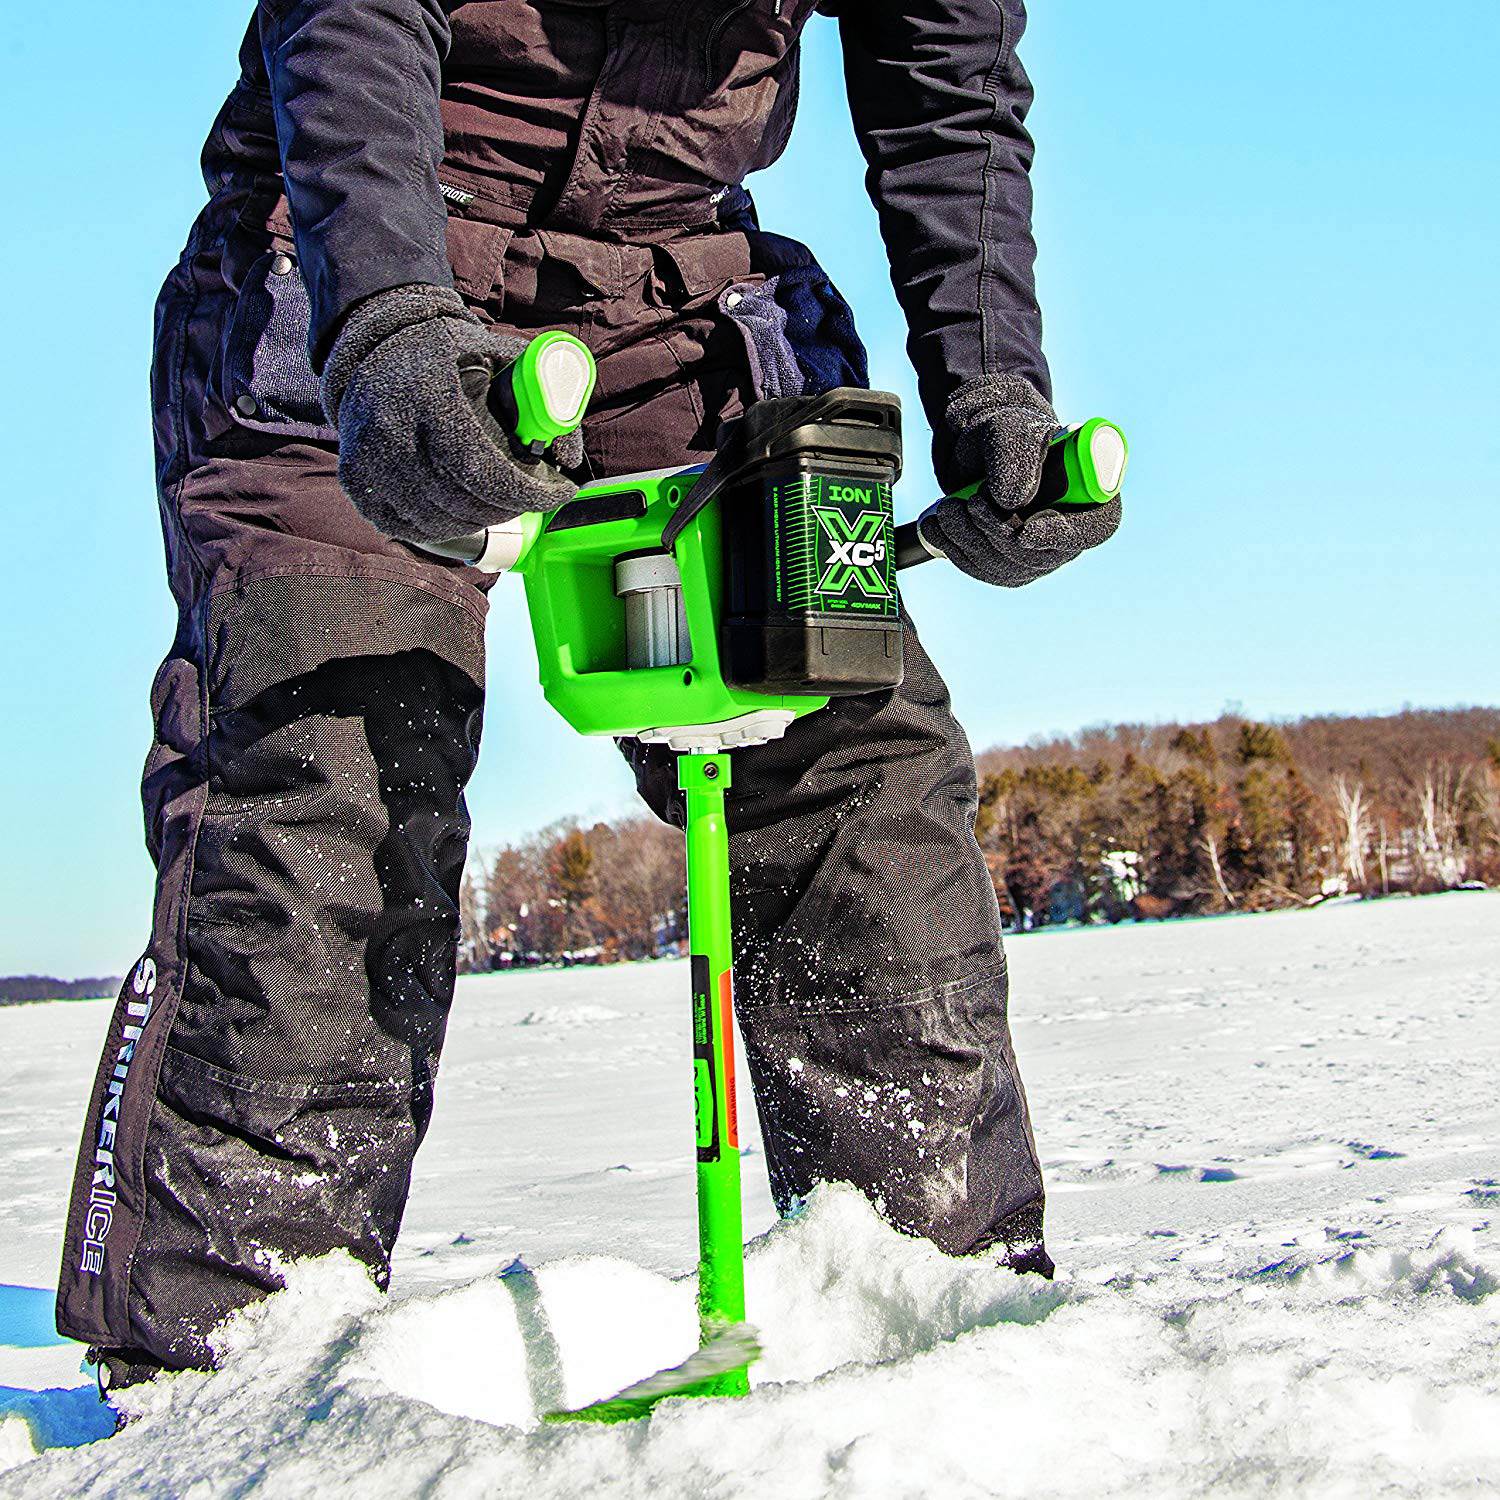 best cordless drill for ice auger